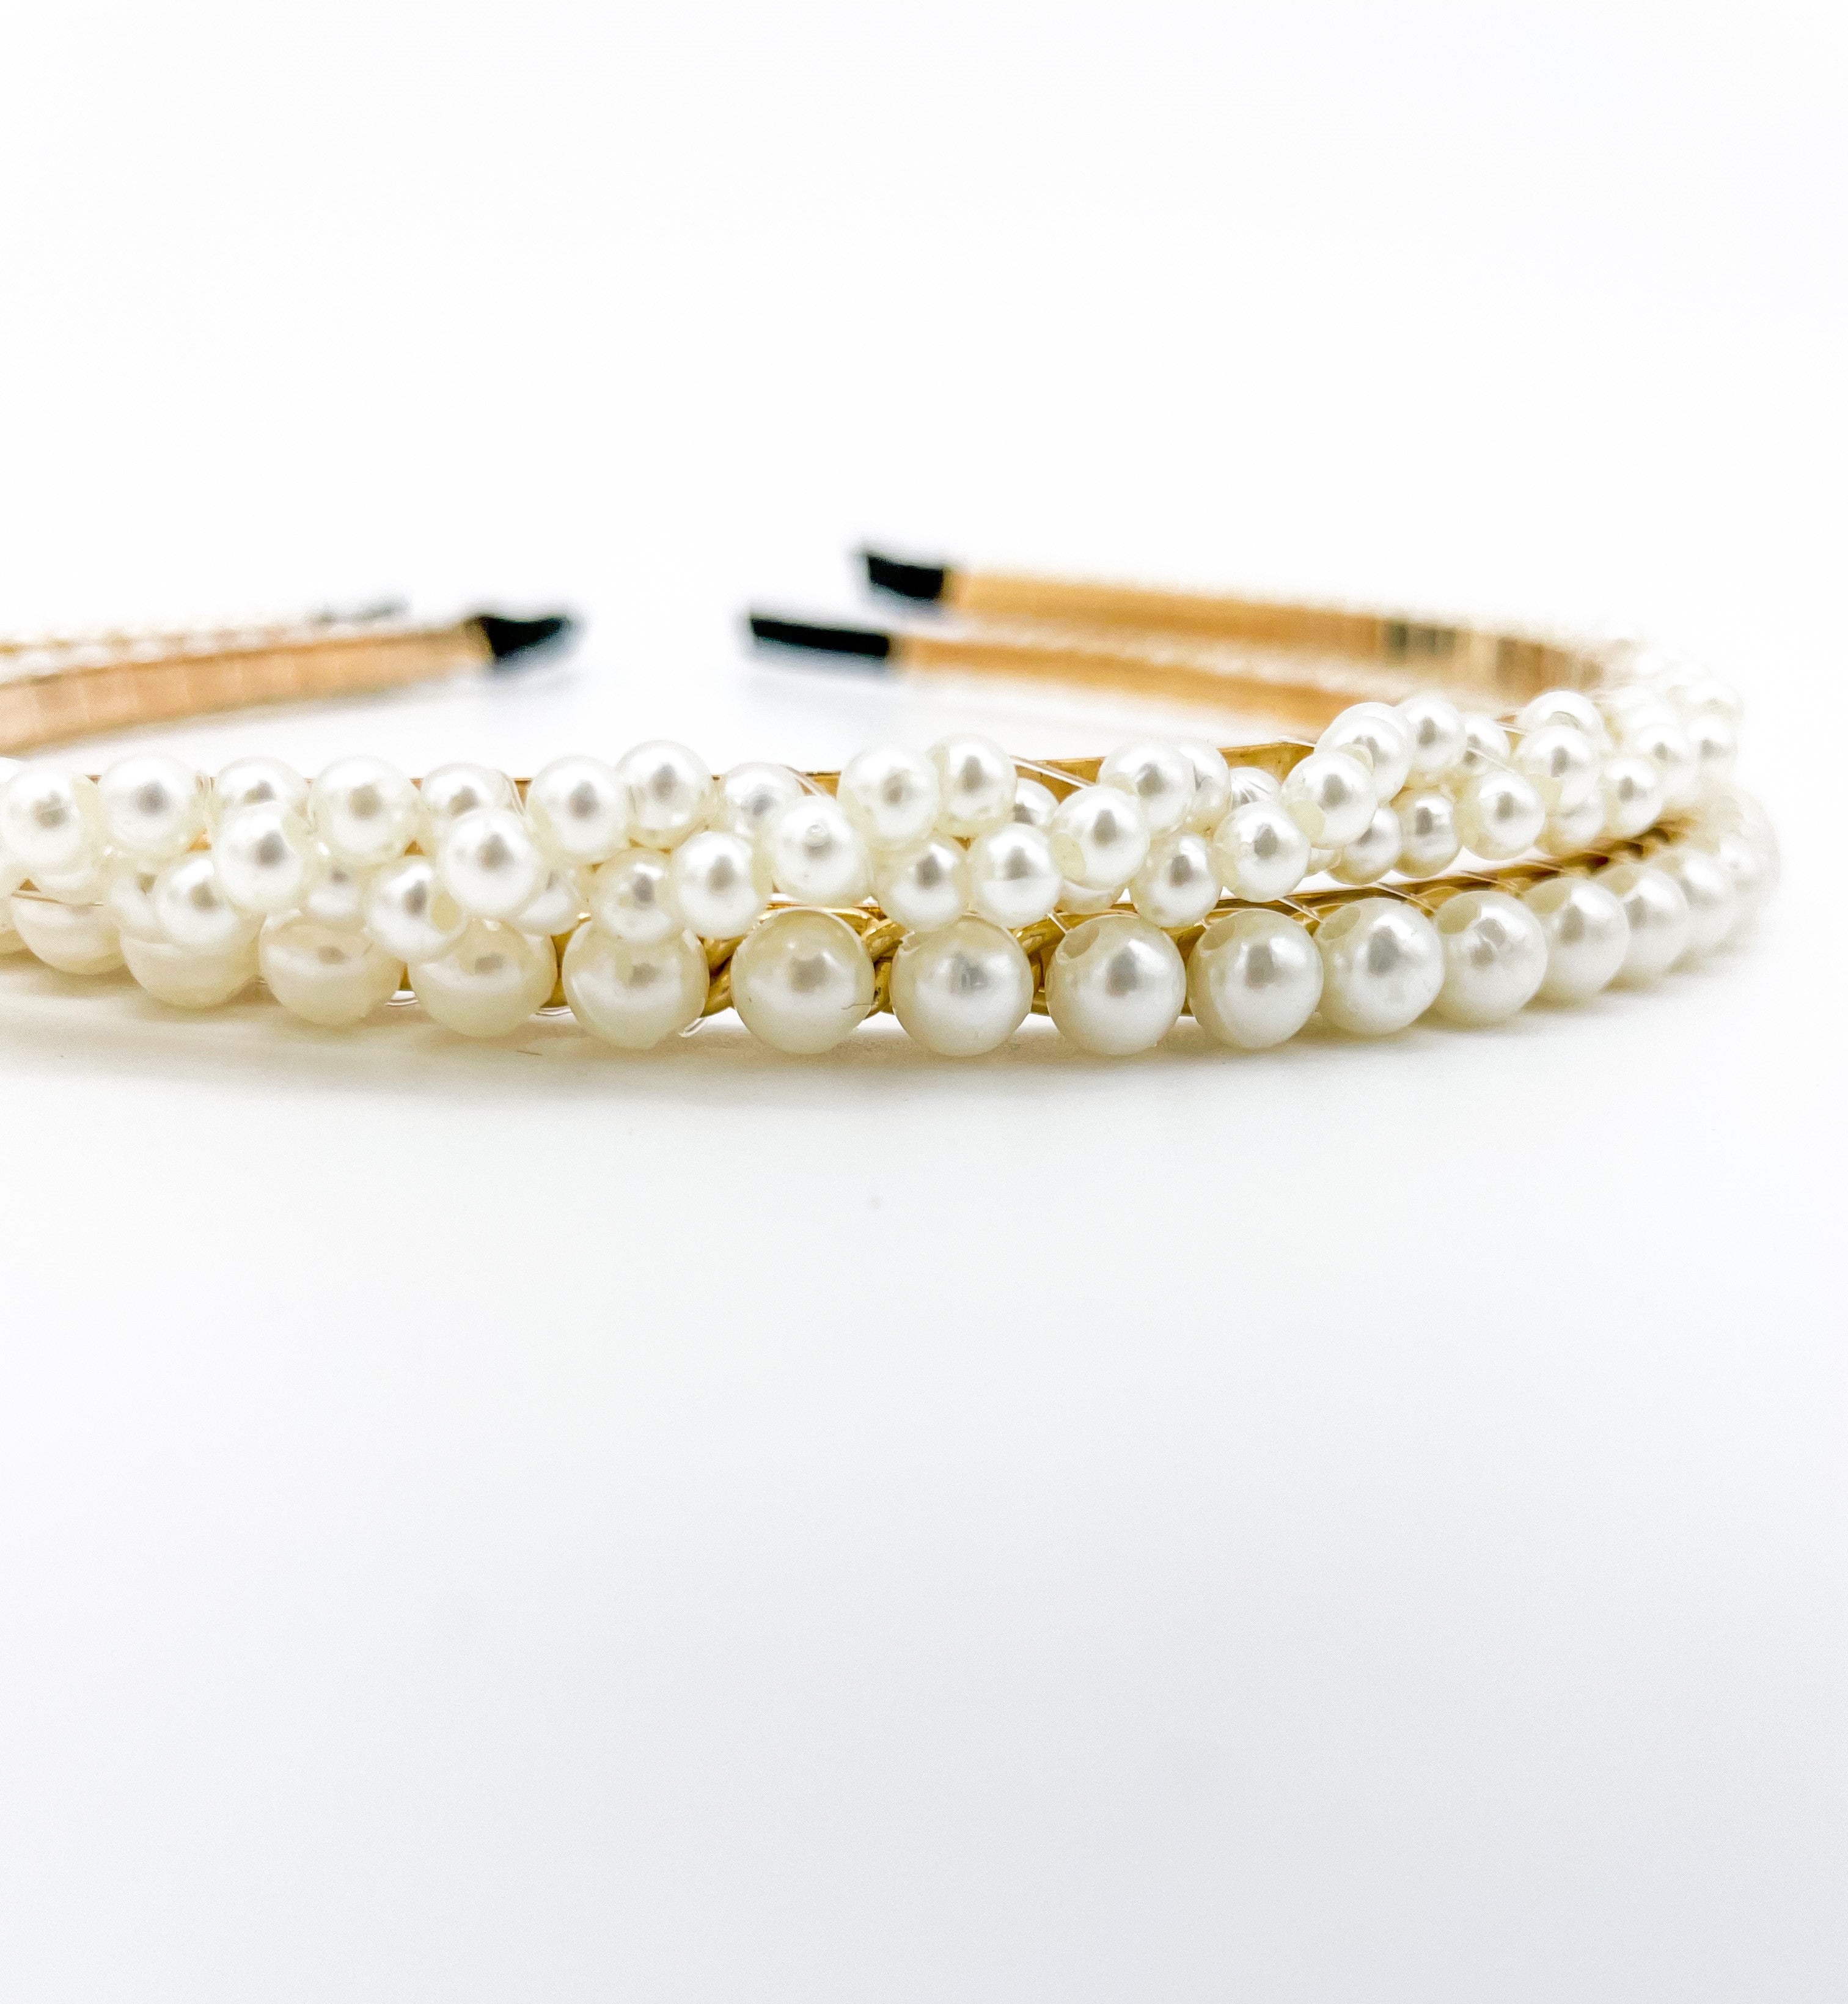 THE TWIN PEARL BAND SET